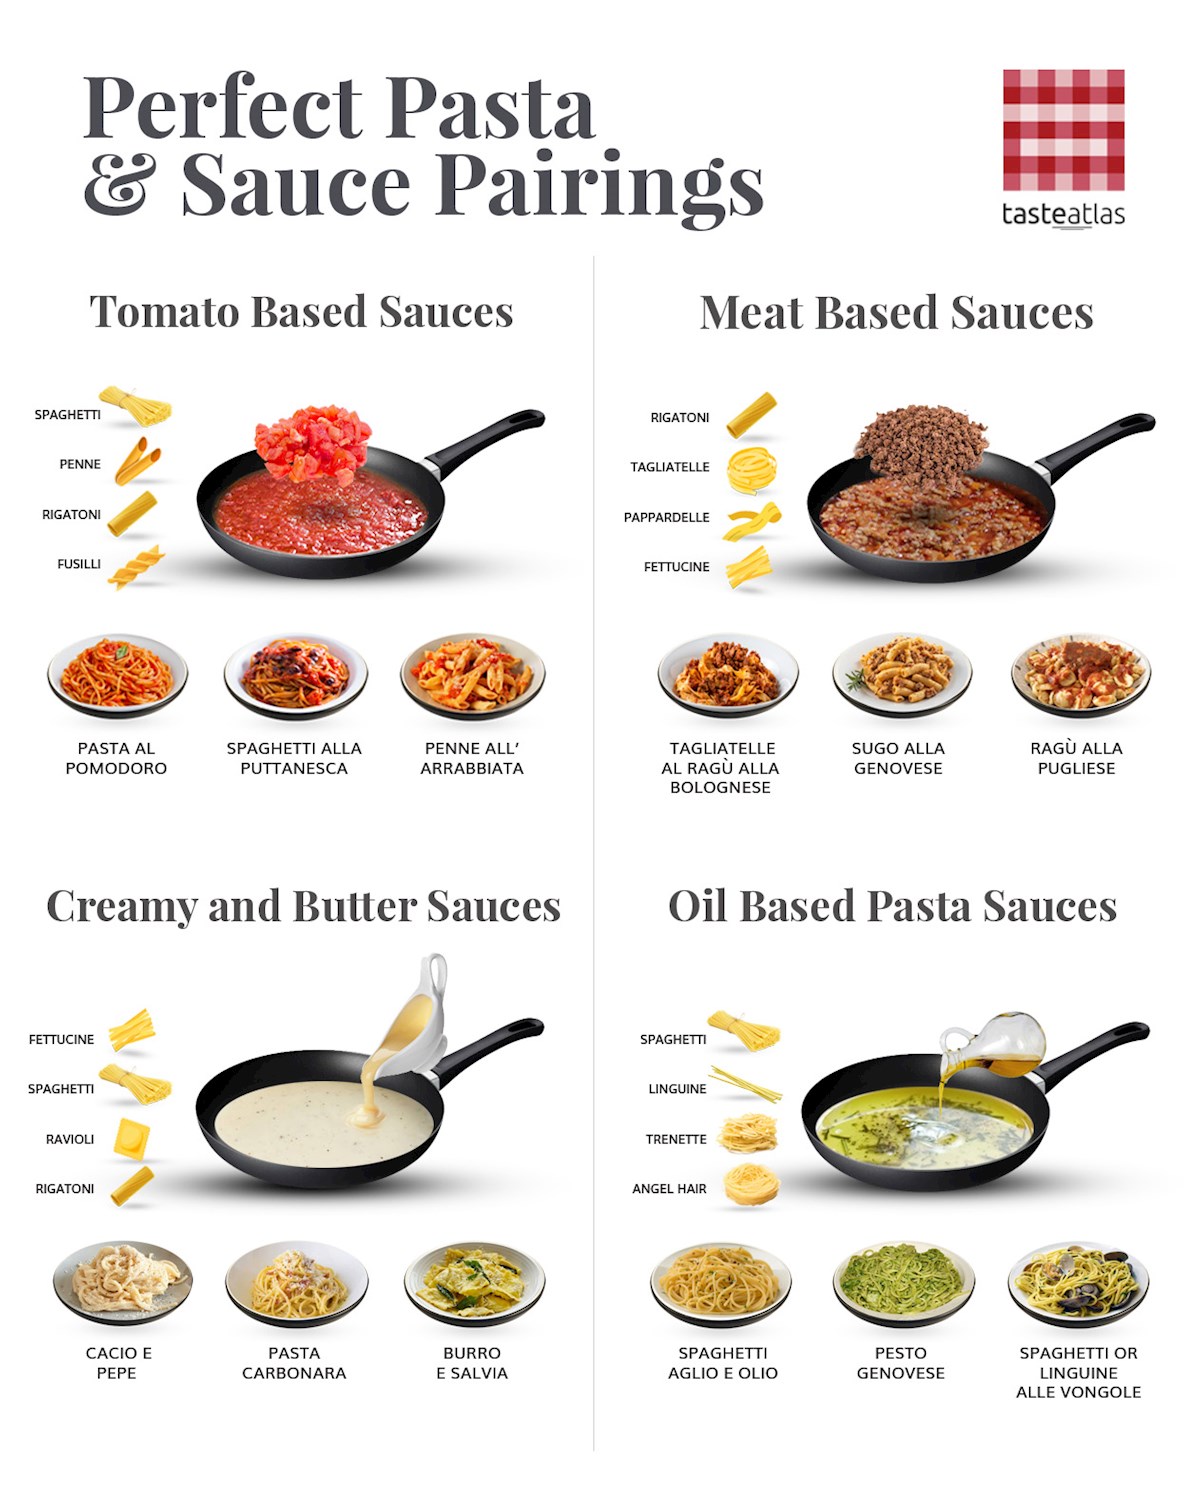 Types of Pasta Sauces: Ingredients, Differences, & More